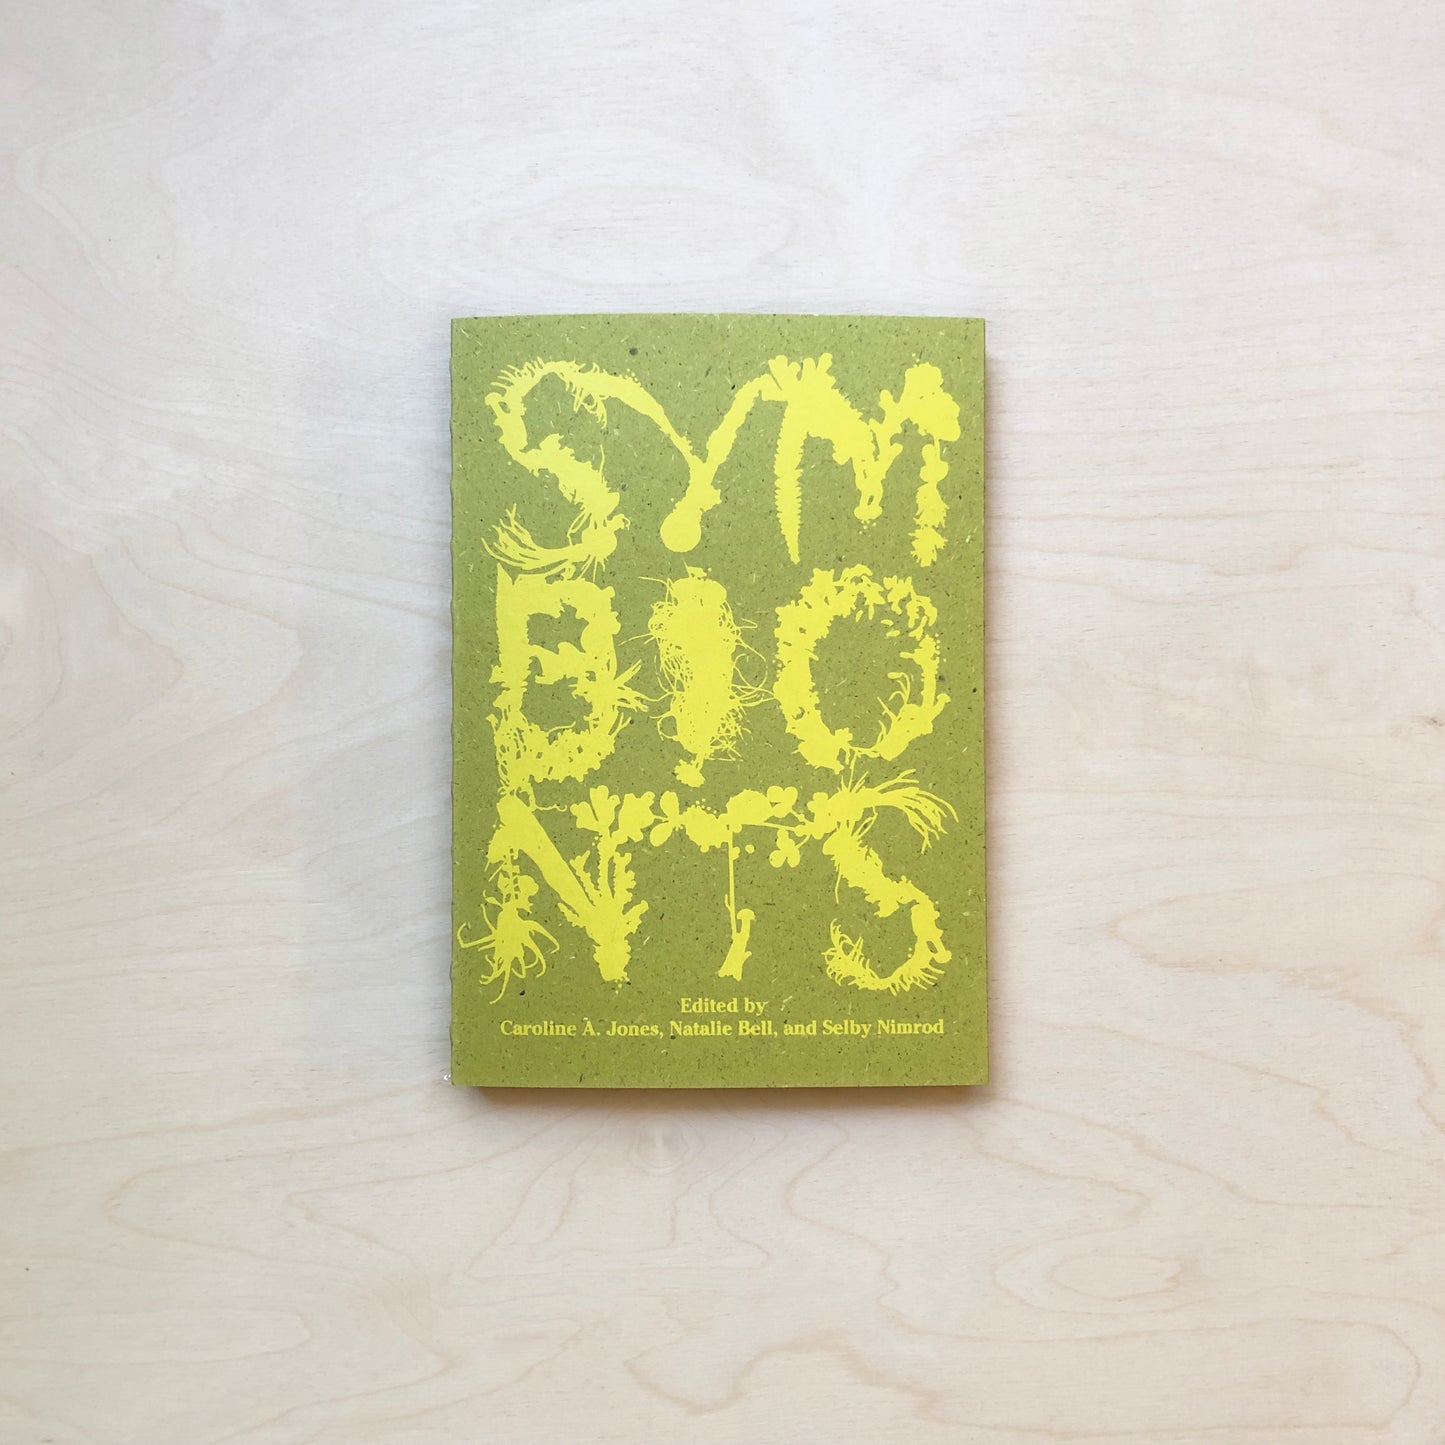 Symbionts - Contemporary Artists and the Biosphere